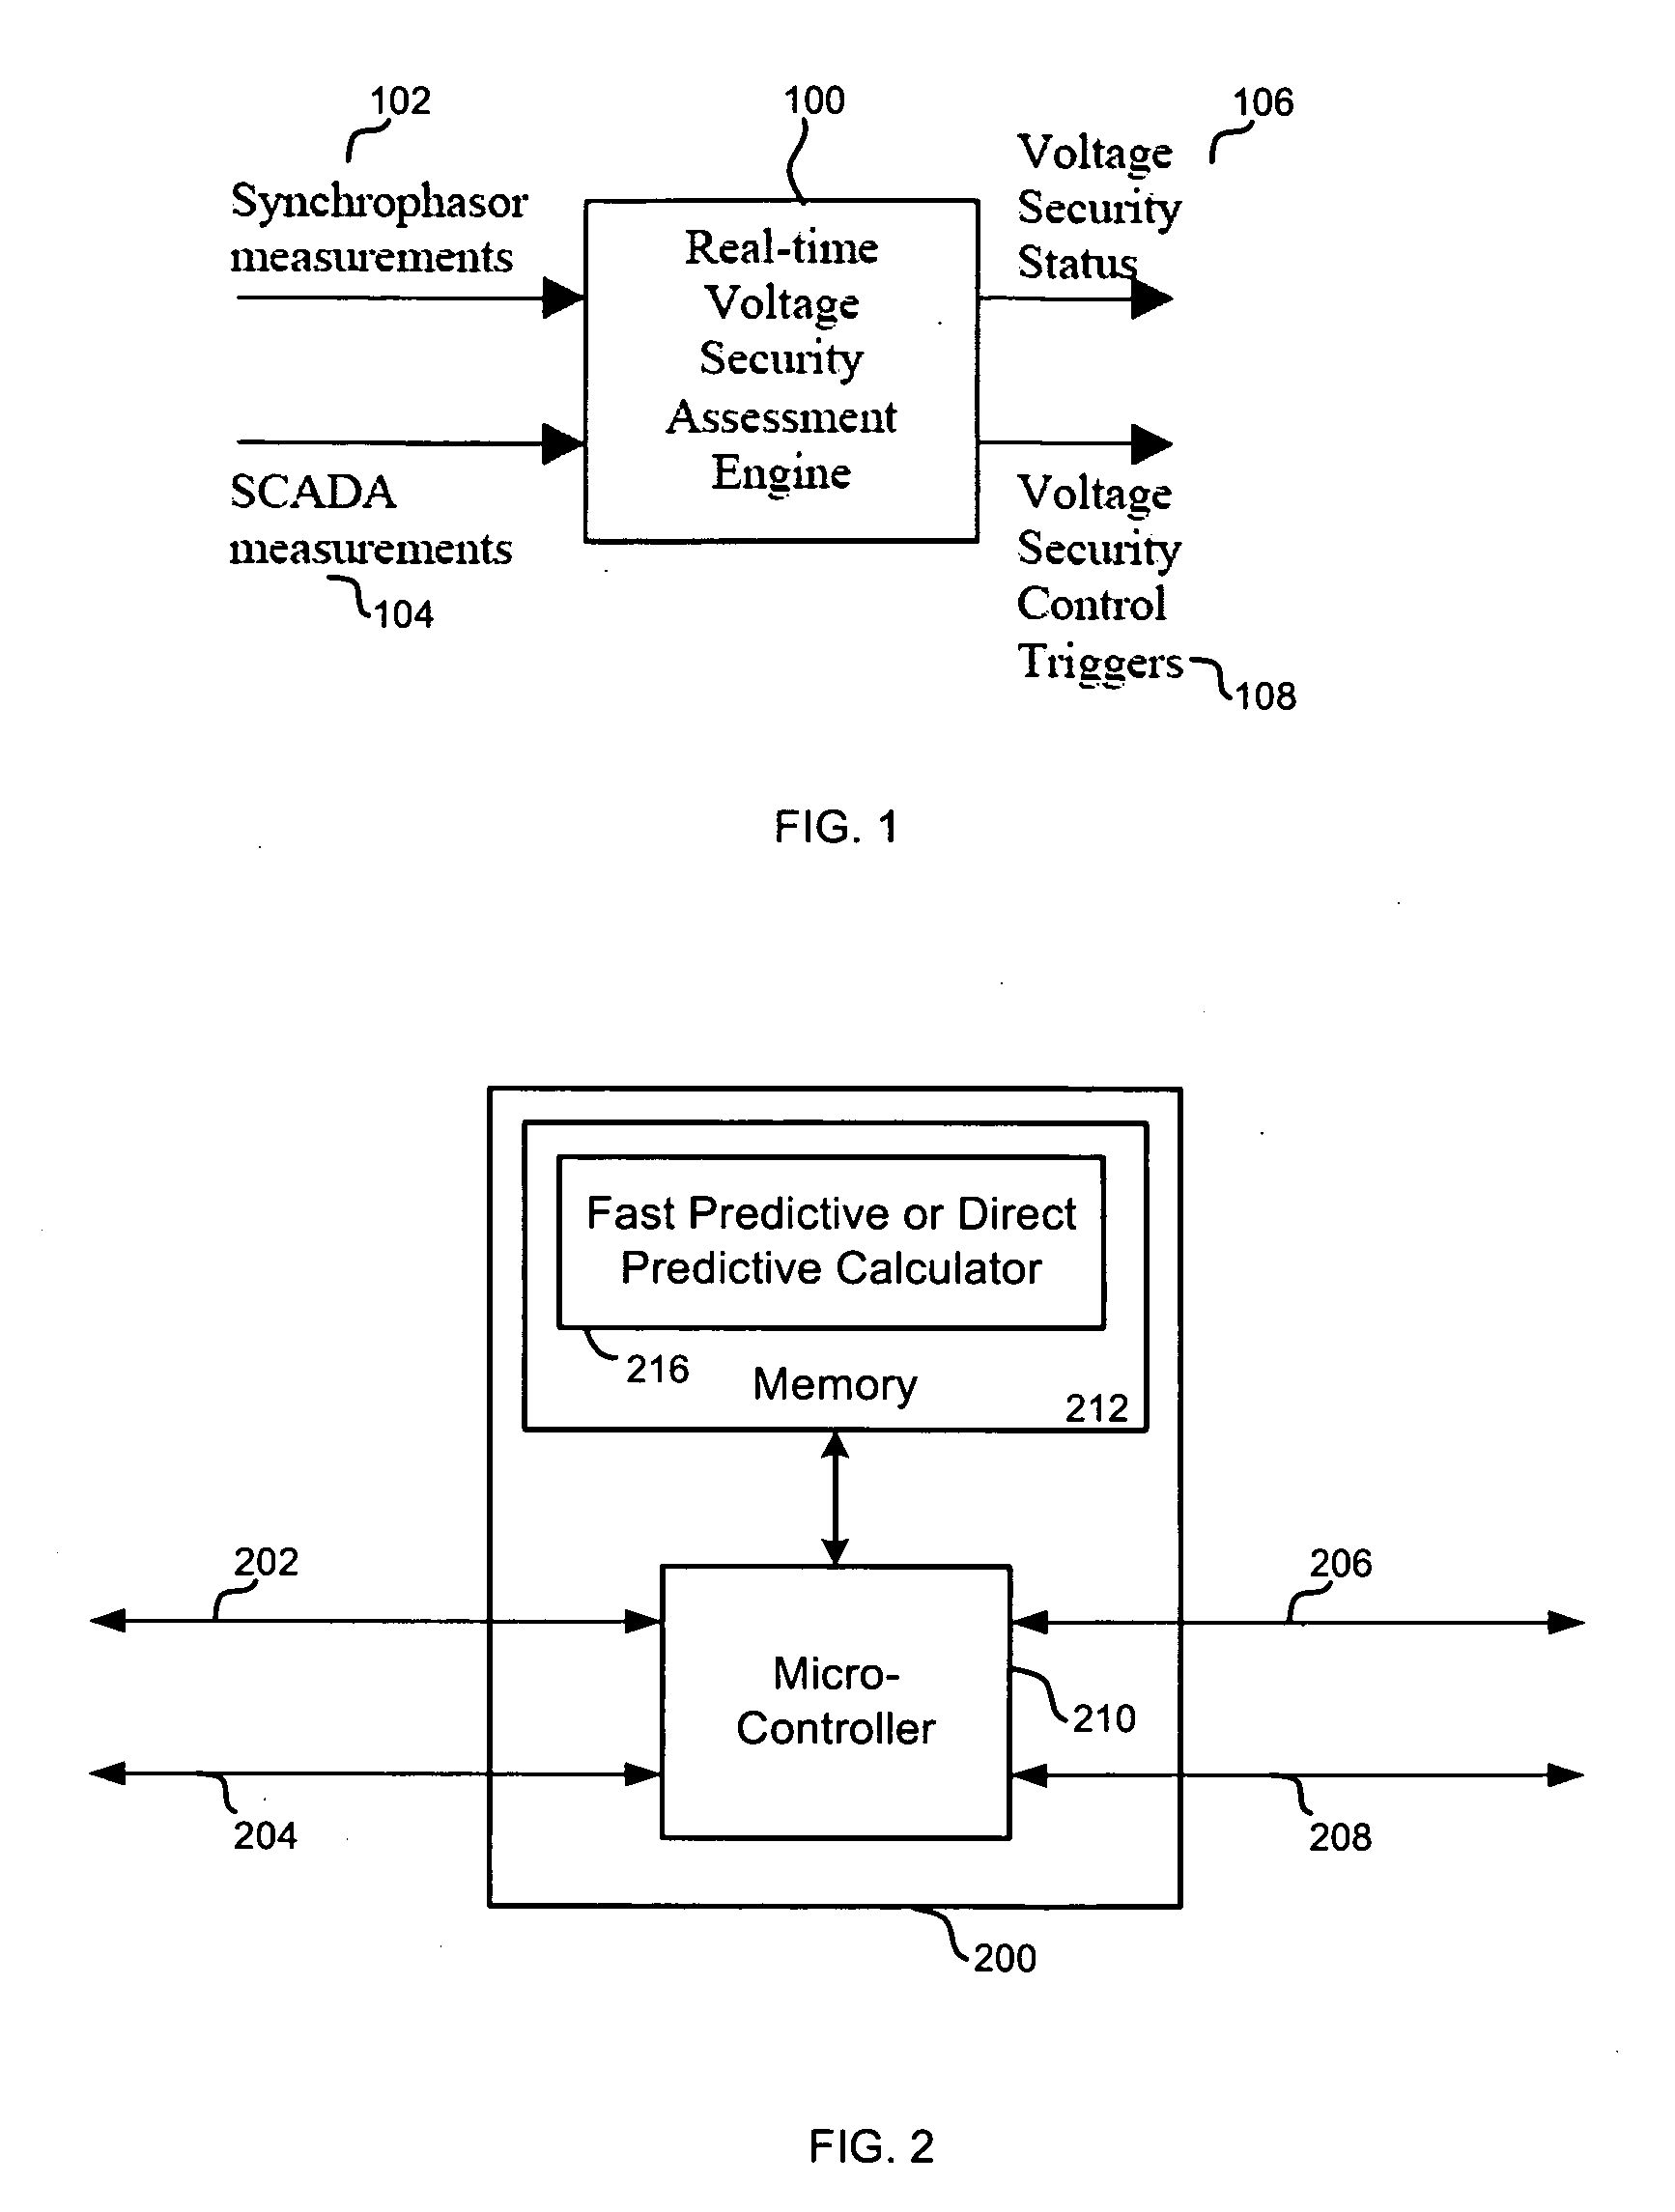 Method and device for assessing and monitoring voltage security in a power system